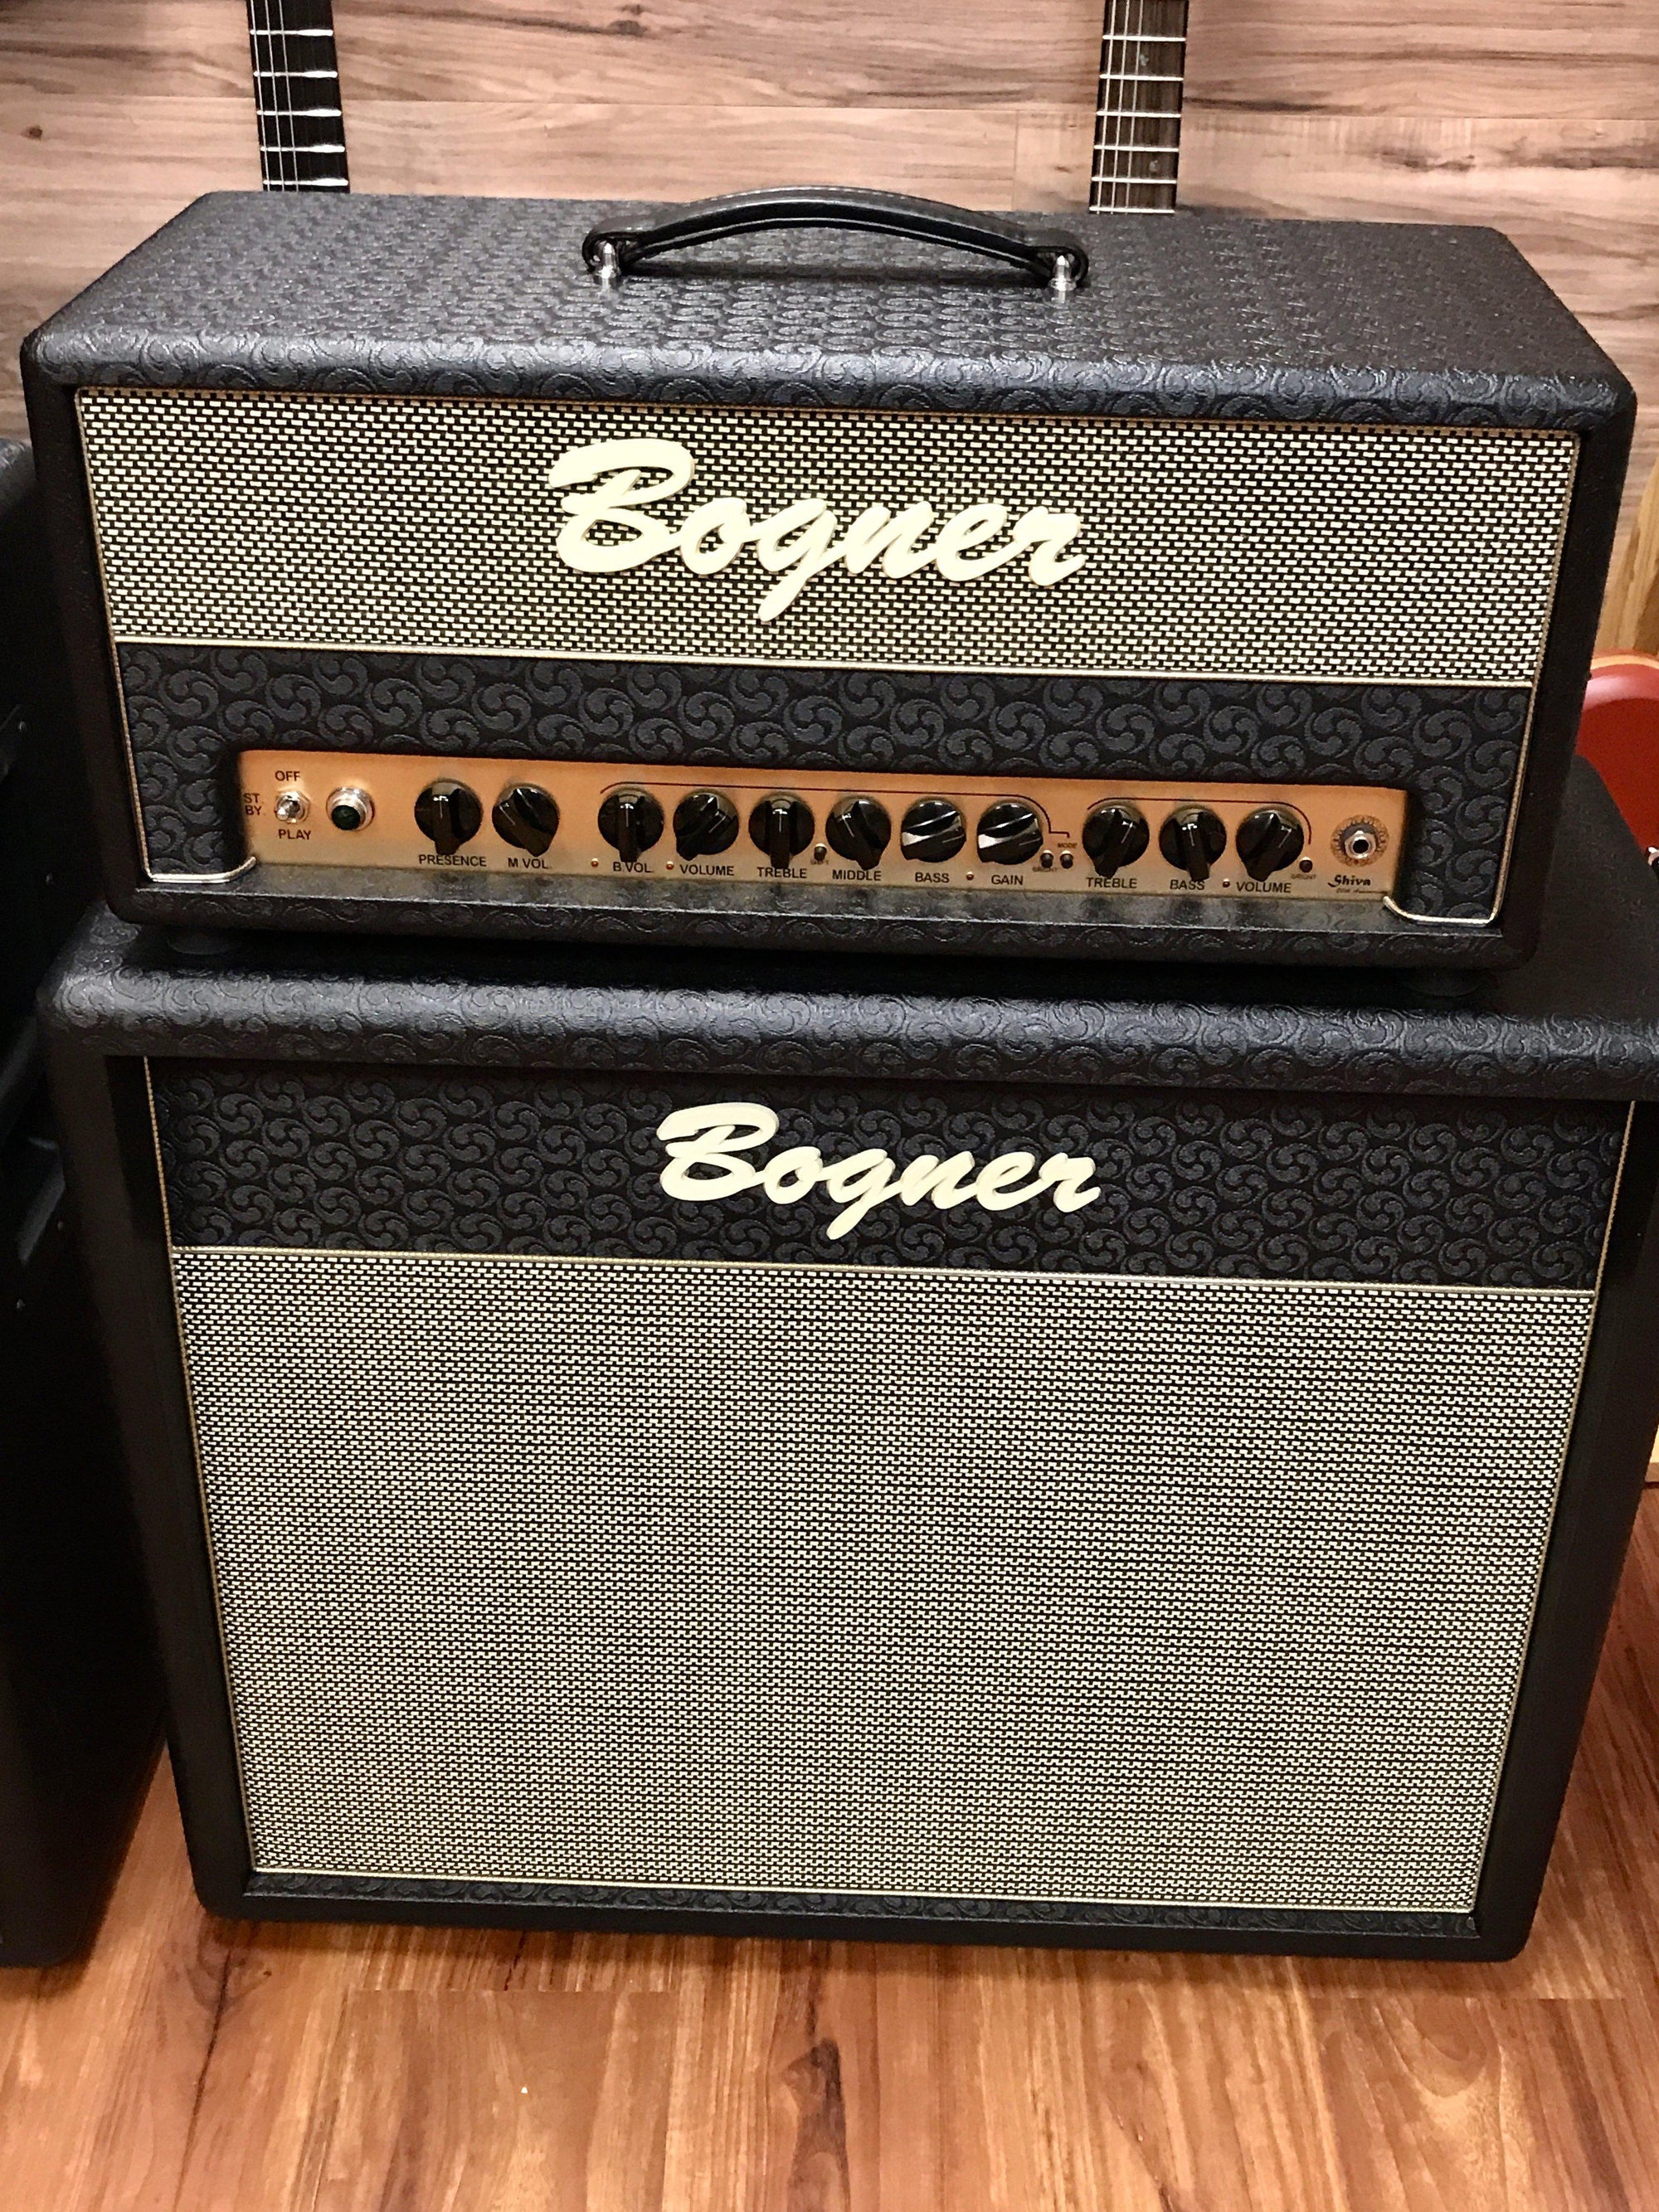 2019 Bogner Shiva Head 20th Anniversary with Reverb and 2x12 Cabinet - Bogner Amplifiers - Heartbreaker Guitars